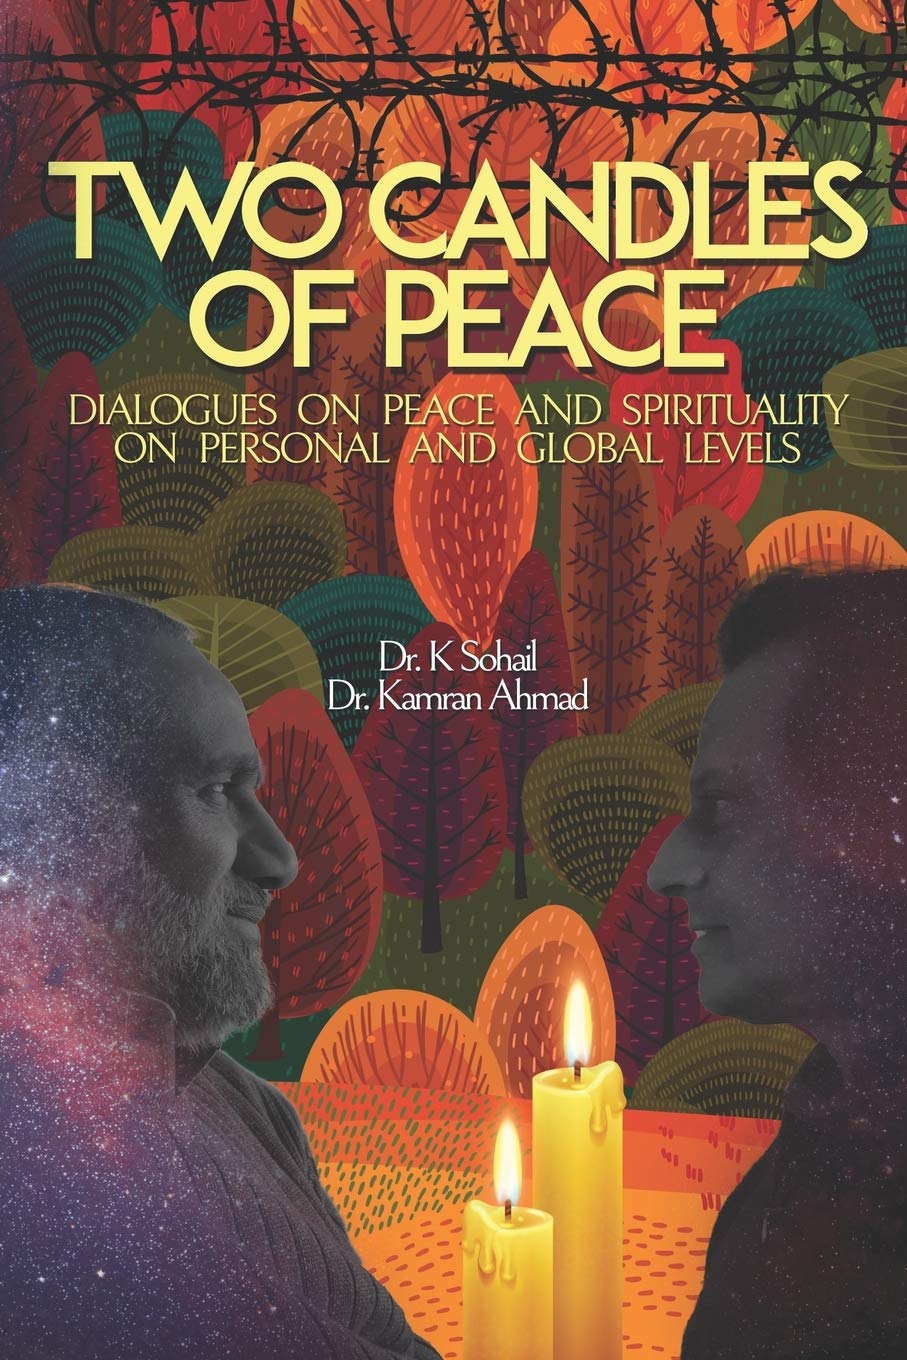 two candles of peace: dialogues on peace and spirituality on personal and global levels